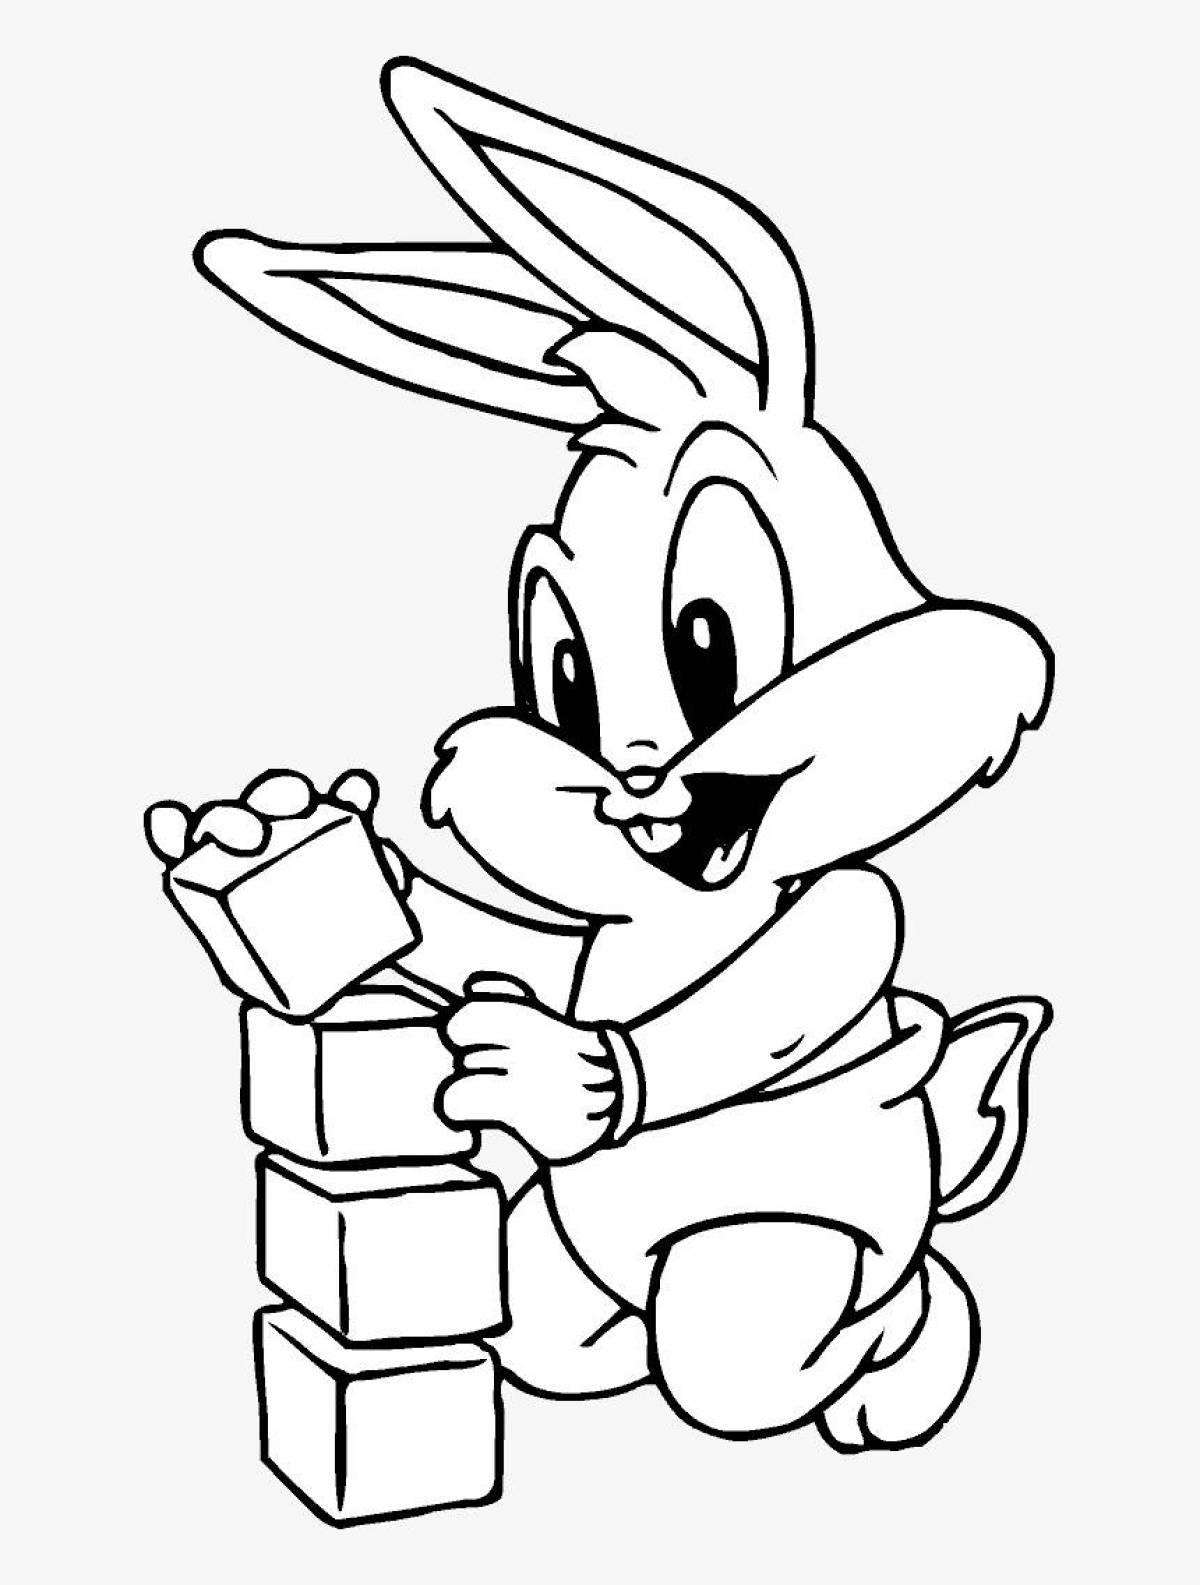 Animated rabbit coloring book